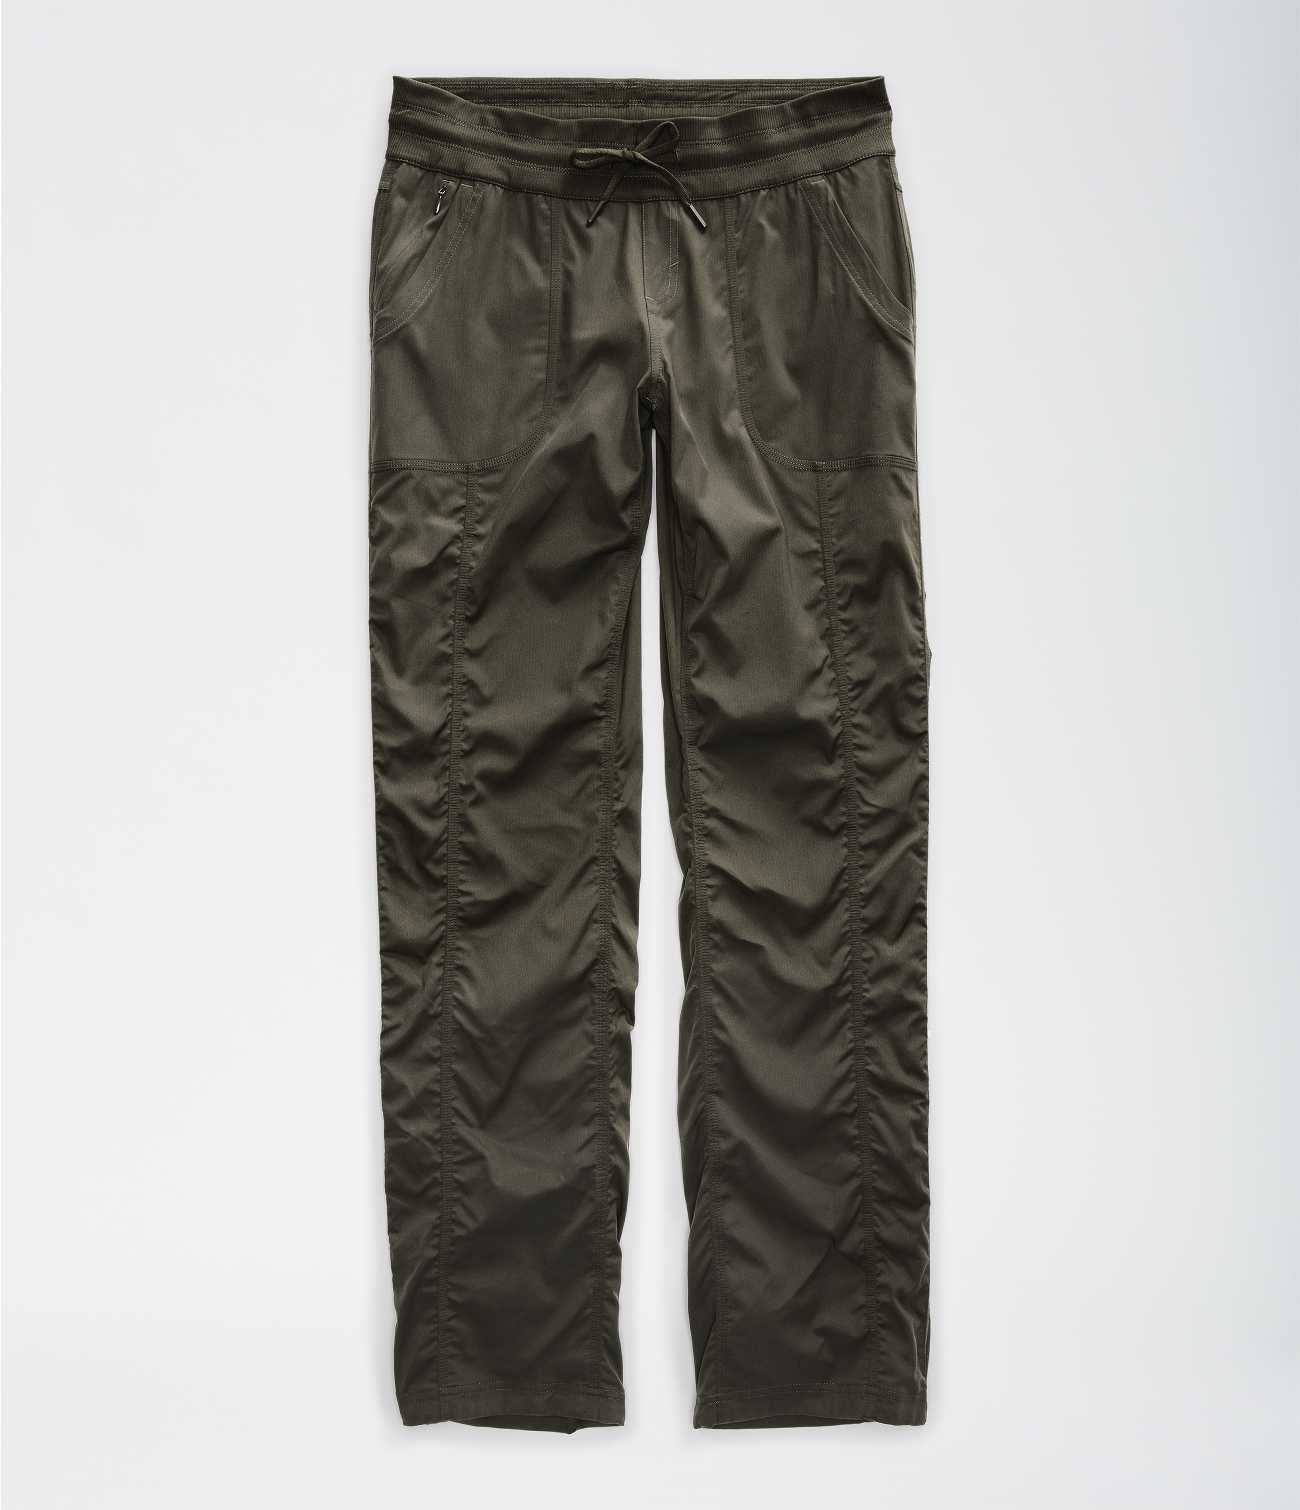 WOMEN'S APHRODITE 2.0 PANT, The North Face